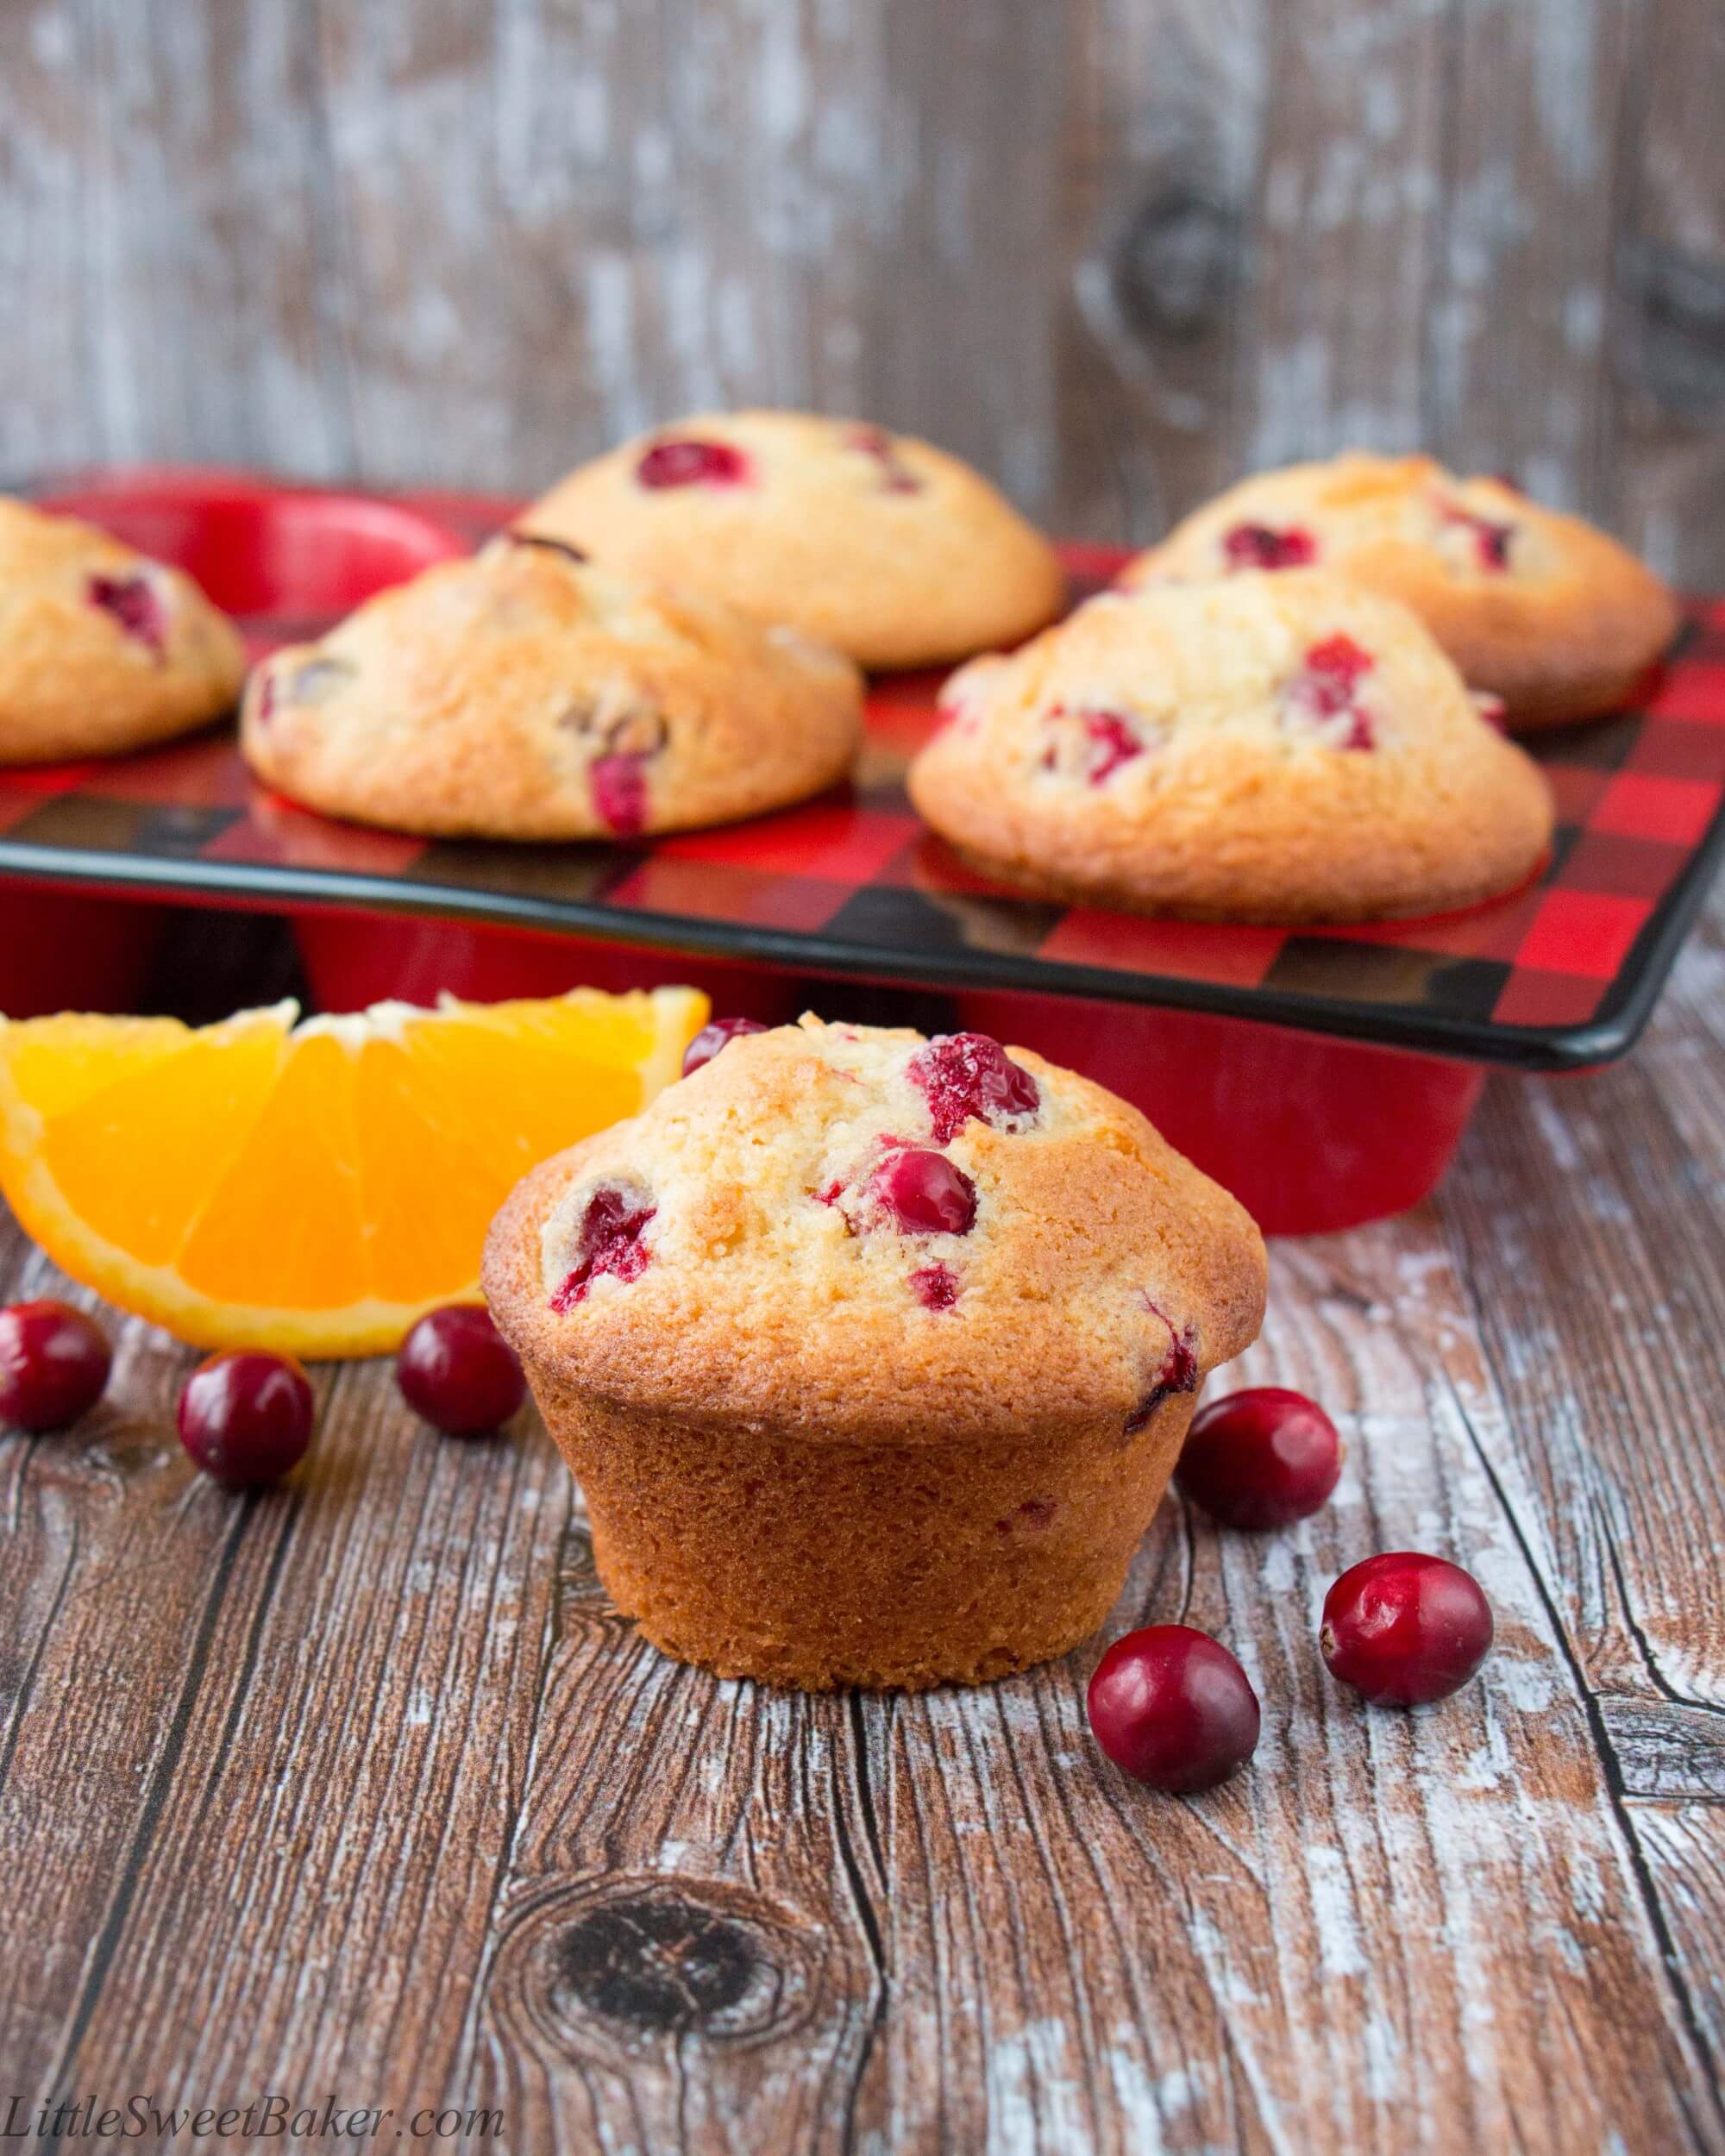 Cranberry Orange Muffins from Little Sweet Baker